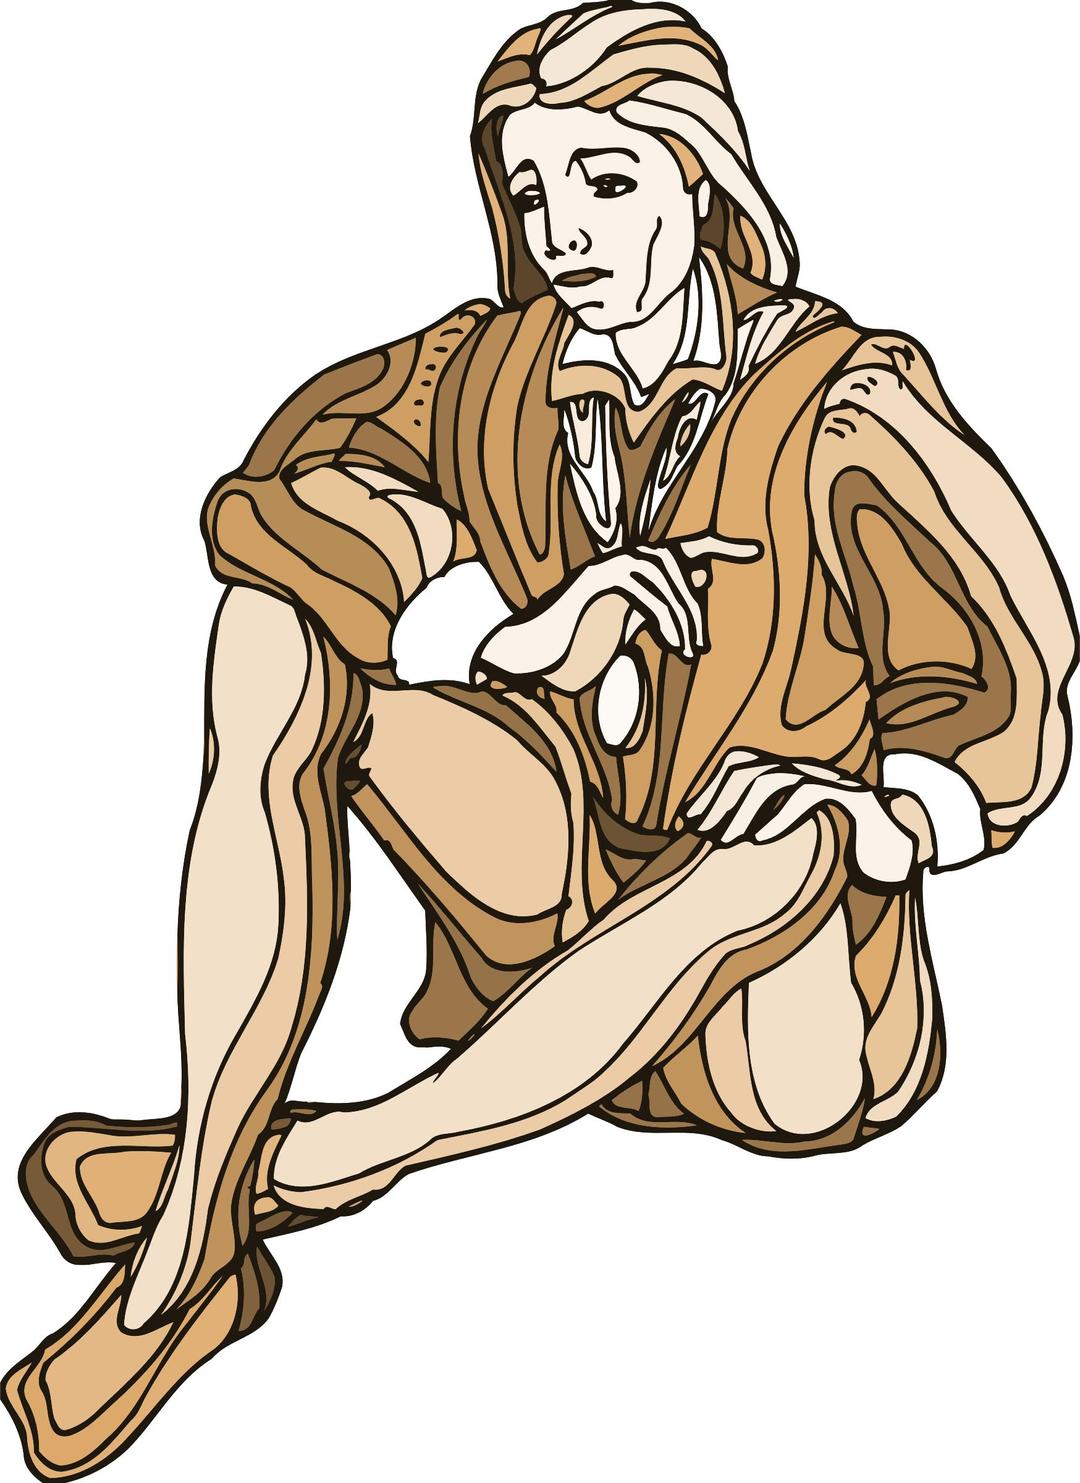 Shakespeare characters - Hamlet png transparent